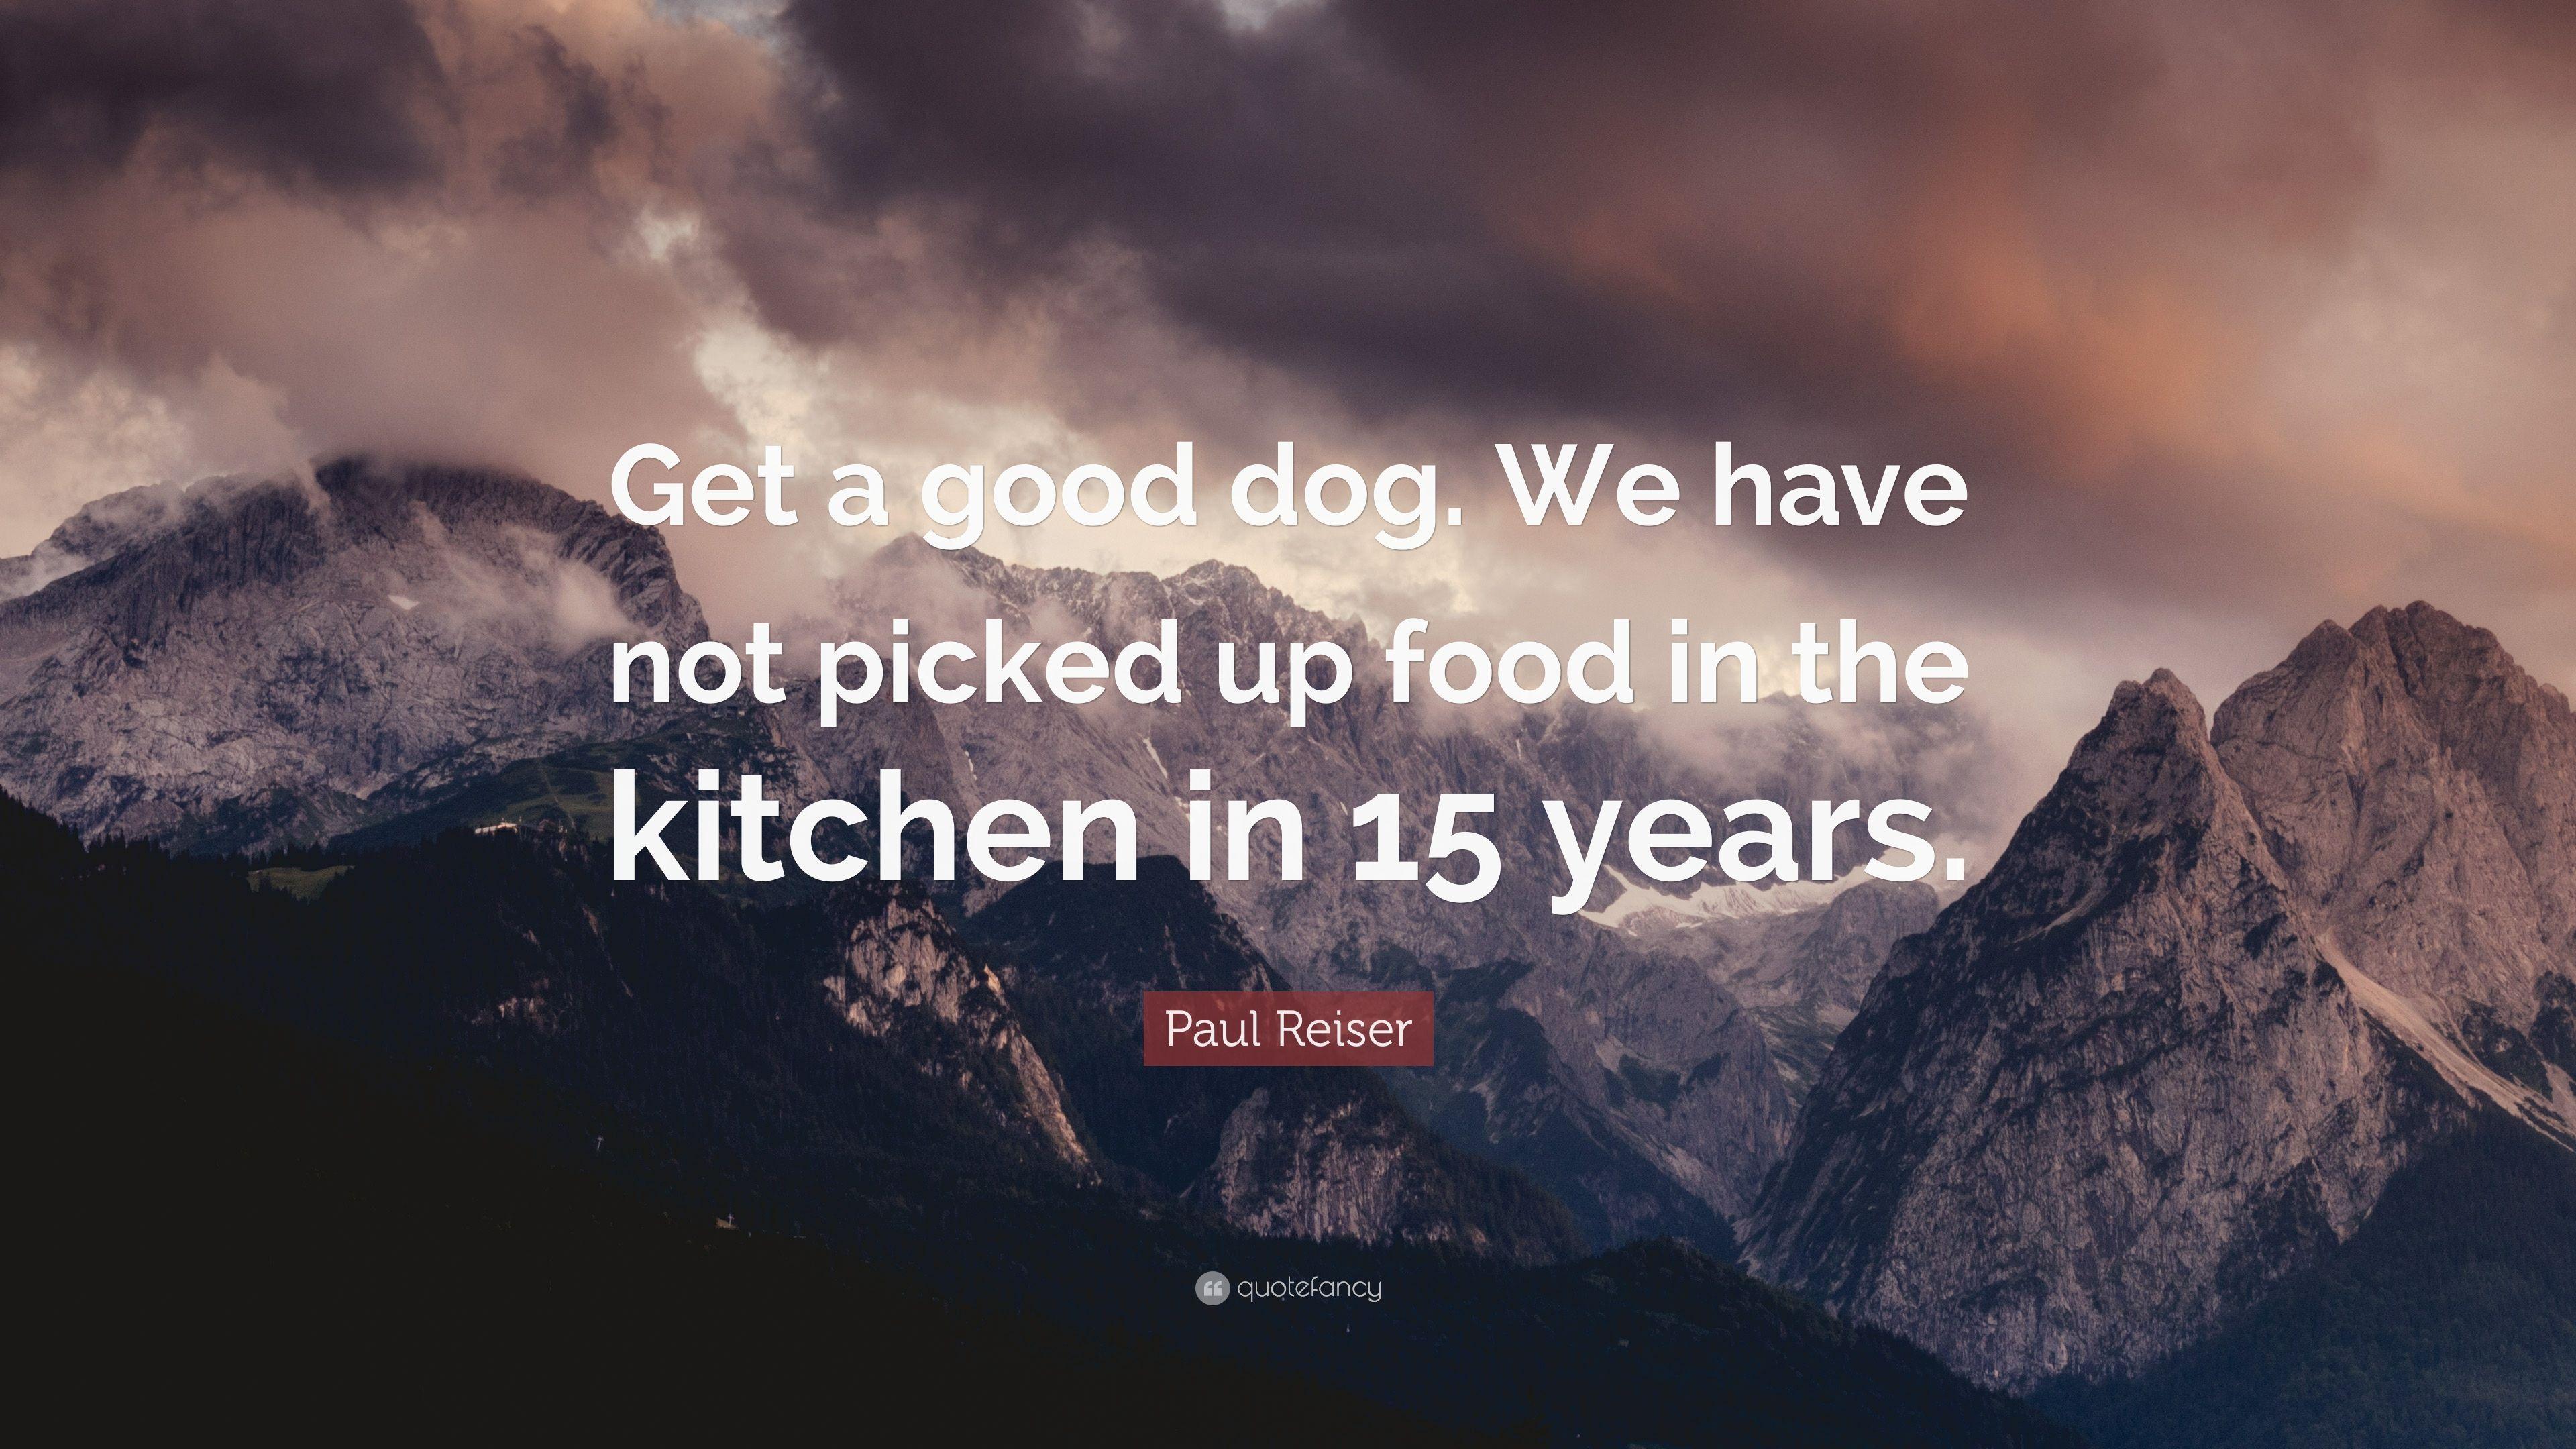 Paul Reiser Quote: “Get a good dog. We have not picked up food